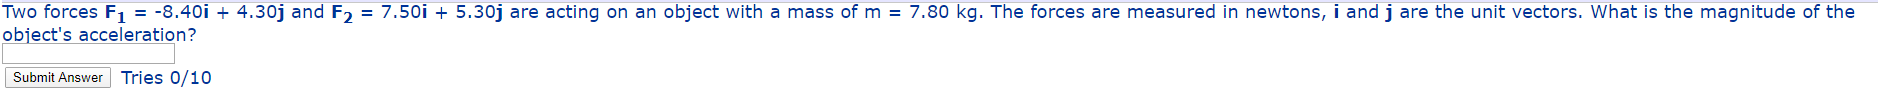 Two forces F, = -8.40i + 4.30j and F, = 7.50i + 5.30j are acting on an object with a mass of m = 7.80 kg. The forces are measured in newtons, i and j are the unit vectors. What is the magnitude of the
object's acceleration?
Submit Answer Tries 0/10
